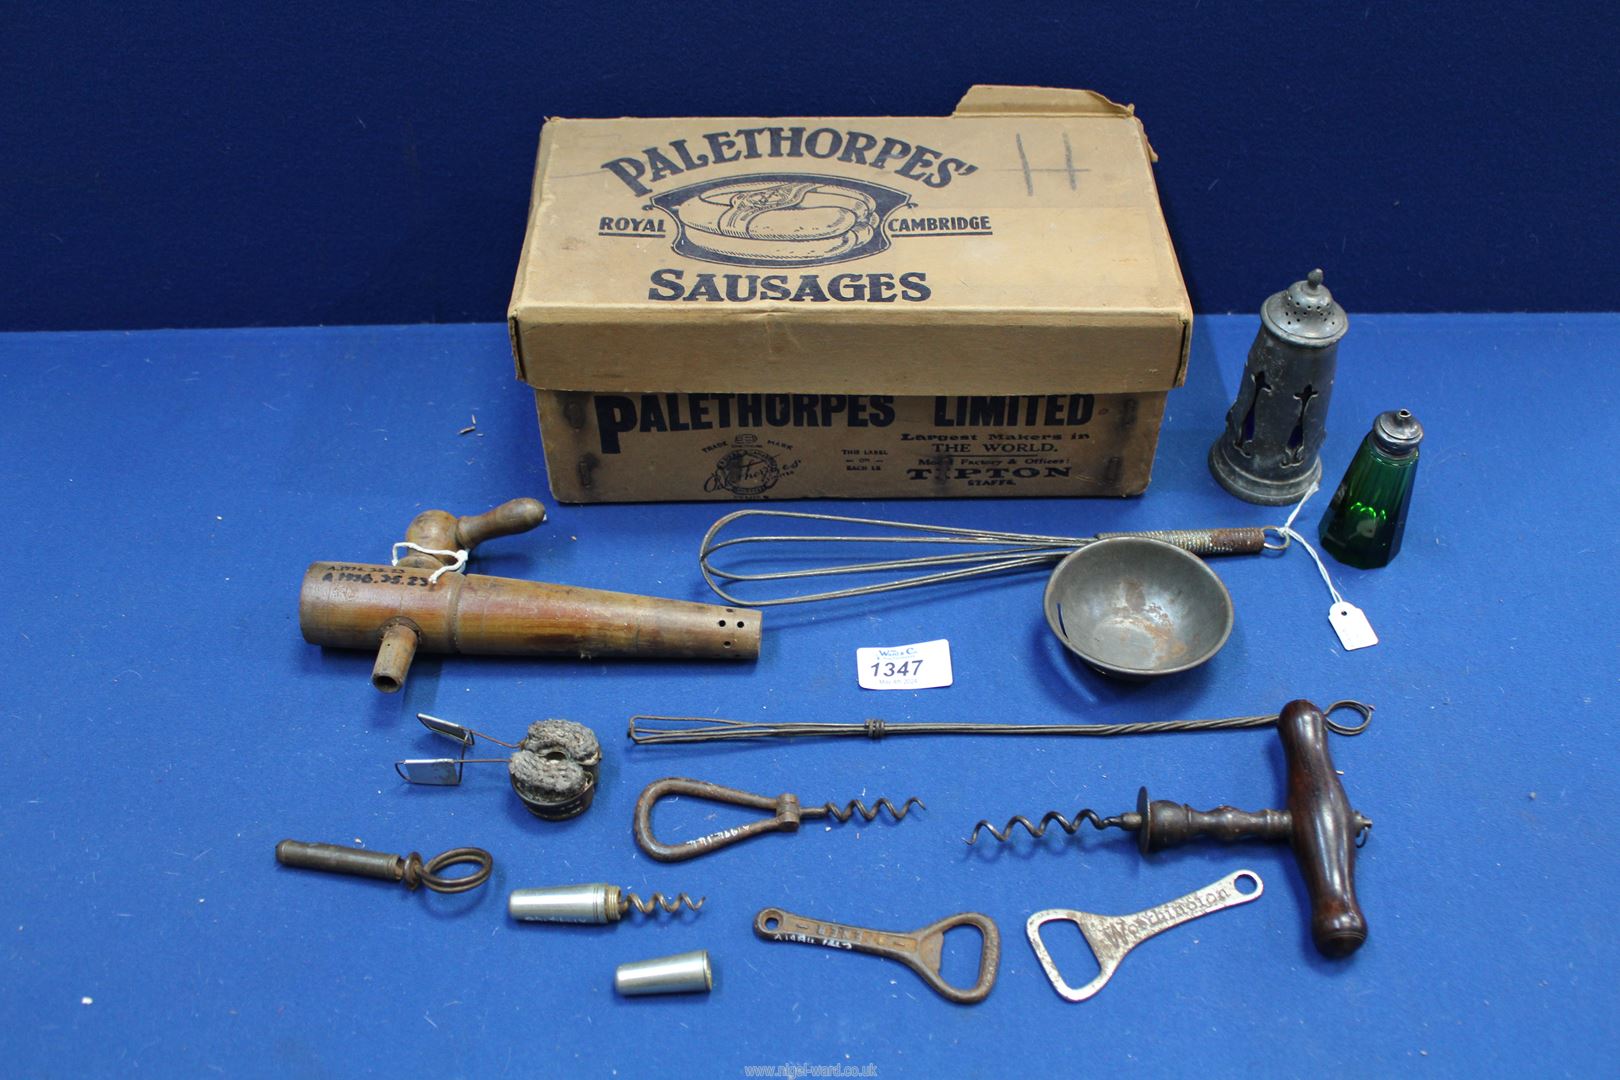 An old Palethorpe Royal Cambridge Sausages cardboard Box containing a blue glass lined pewter